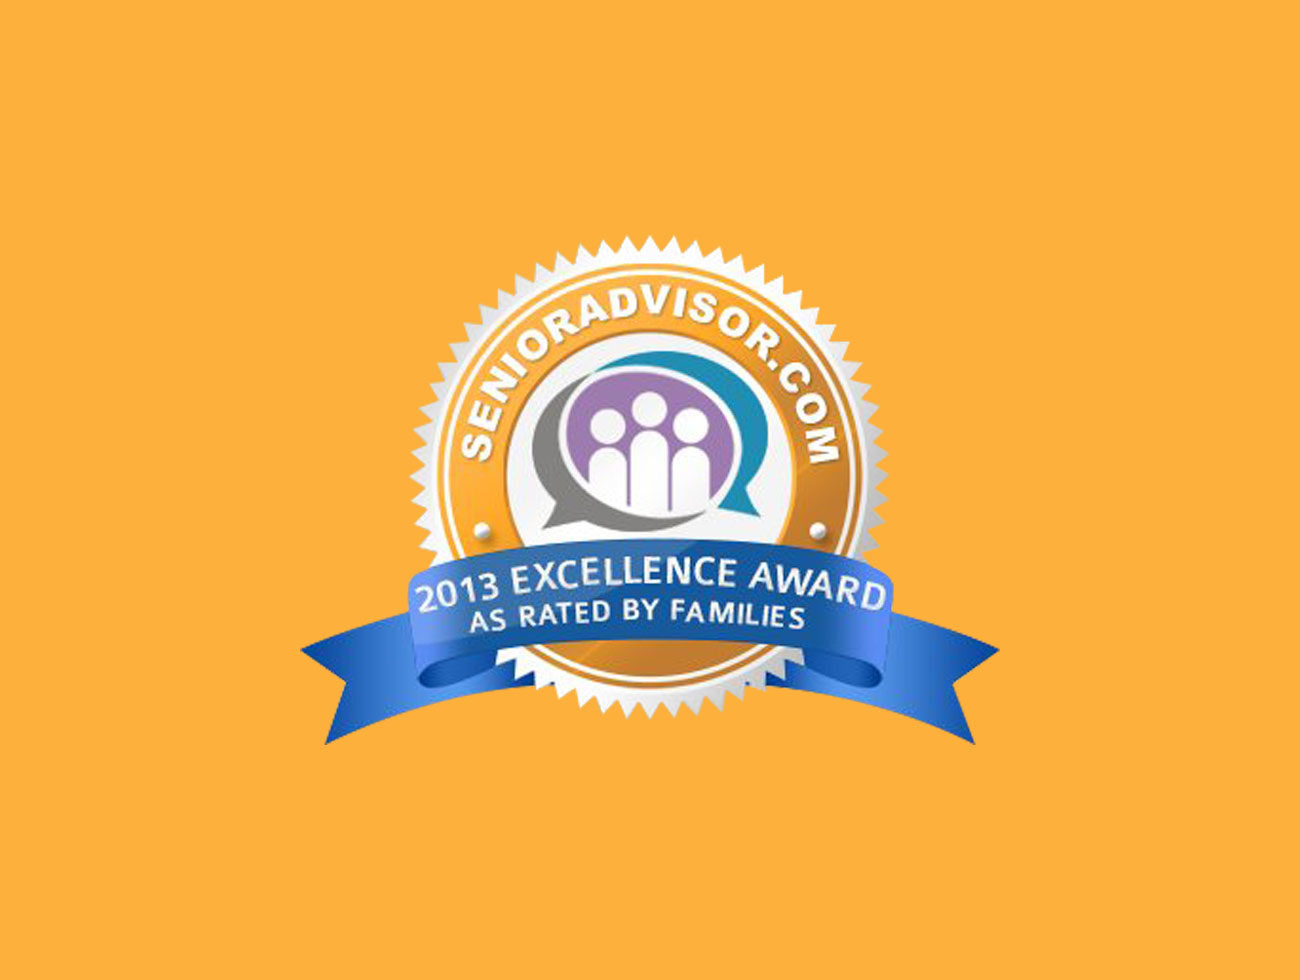 senioradvisor.com 2013 Excellence Award - As Rated By Families